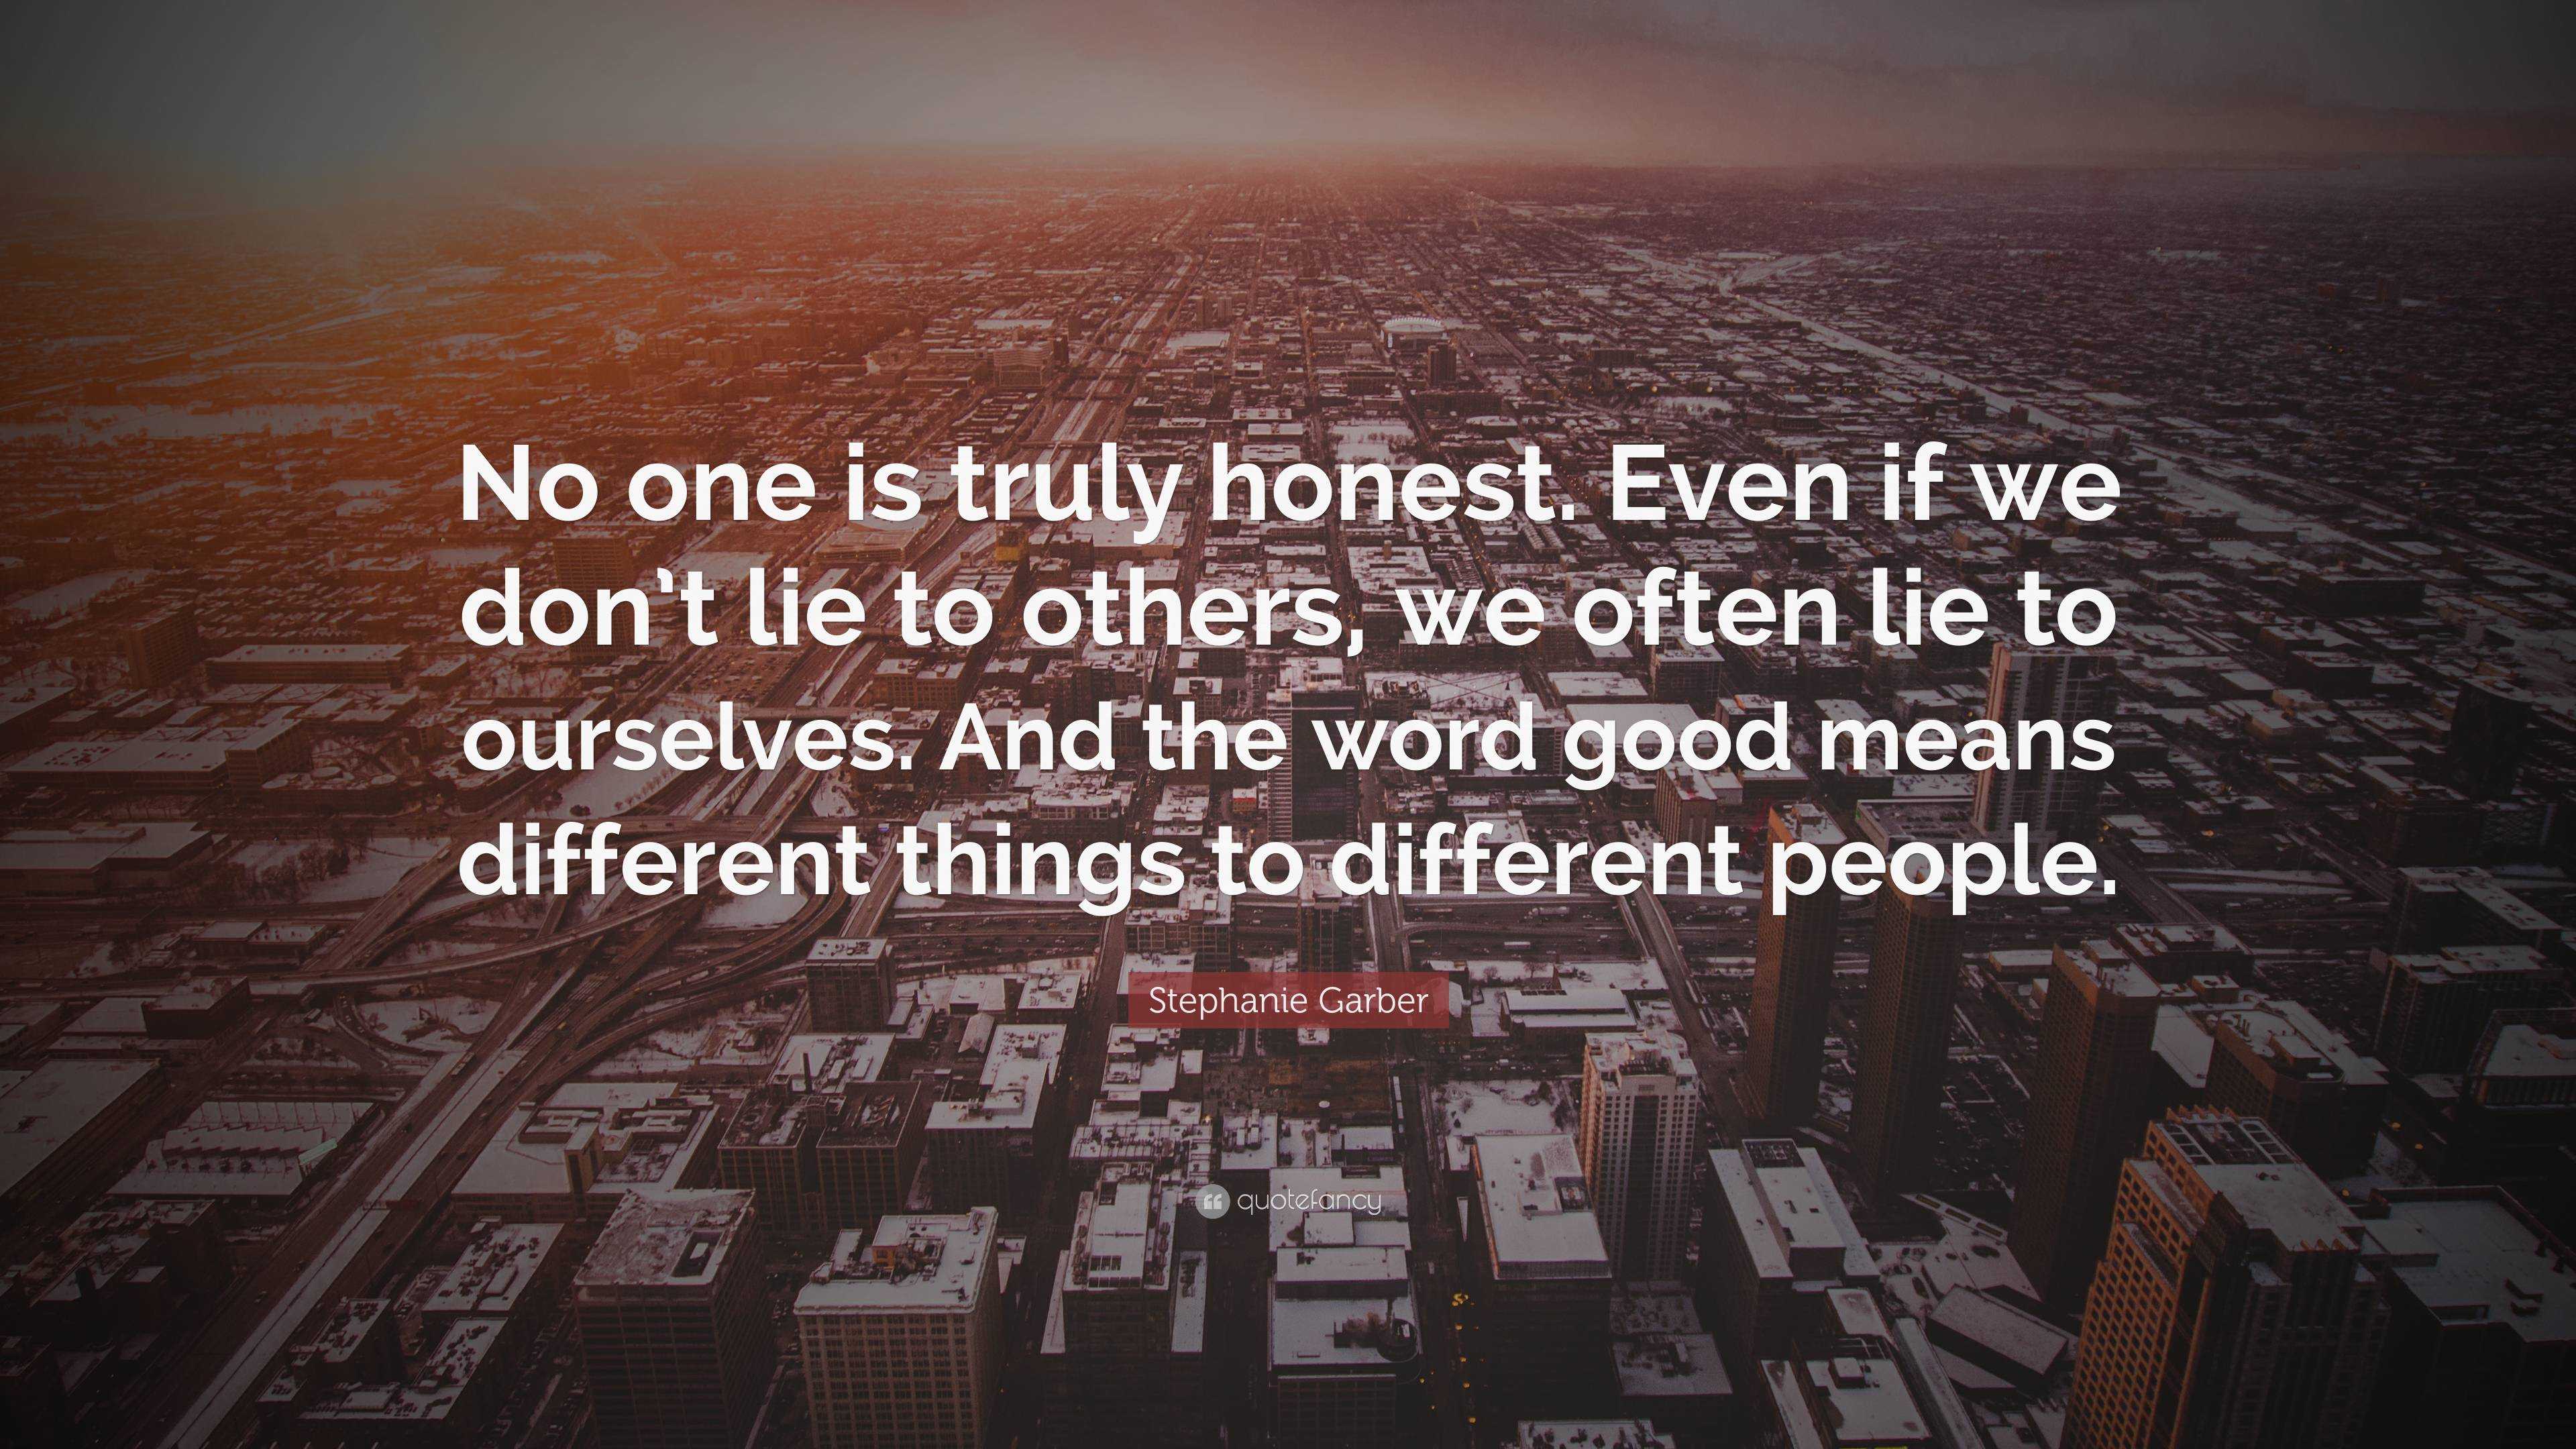 Stephanie Garber Quote: “No one is truly honest. Even if we don’t lie ...